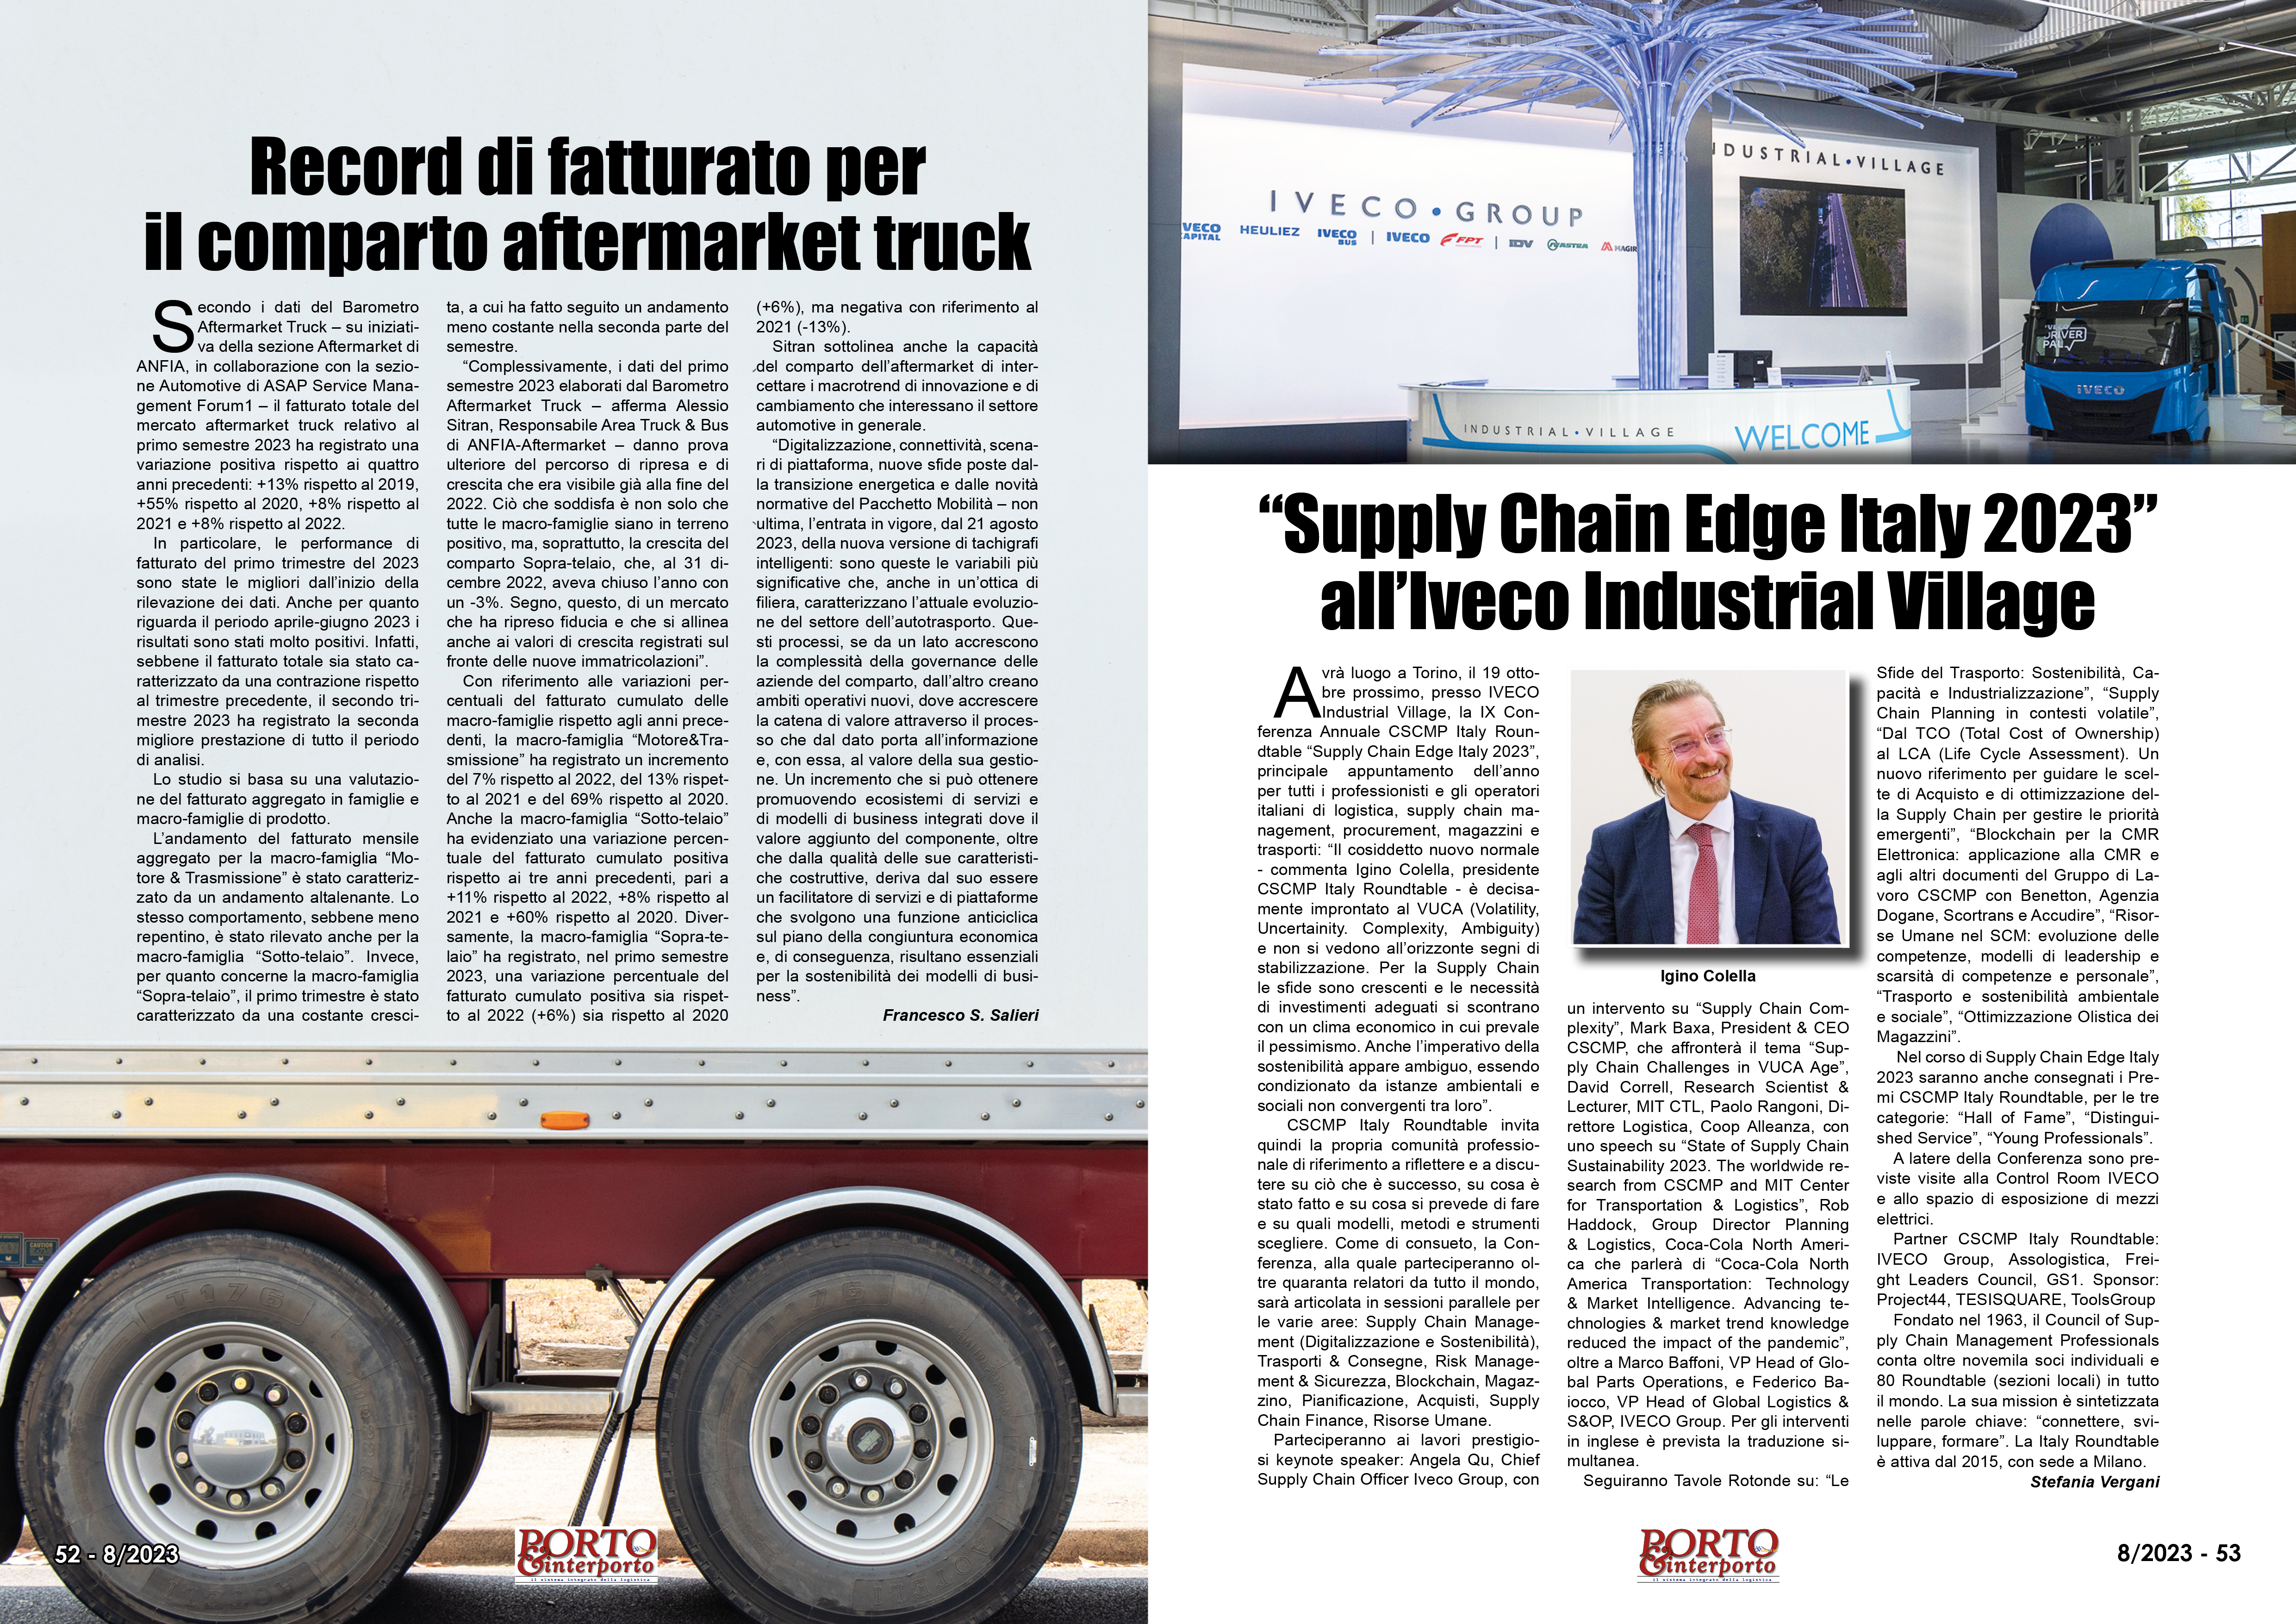 AGOSTO 2023 PAG. 53 - “Supply Chain Edge Italy 2023” all’Iveco Industrial Village 